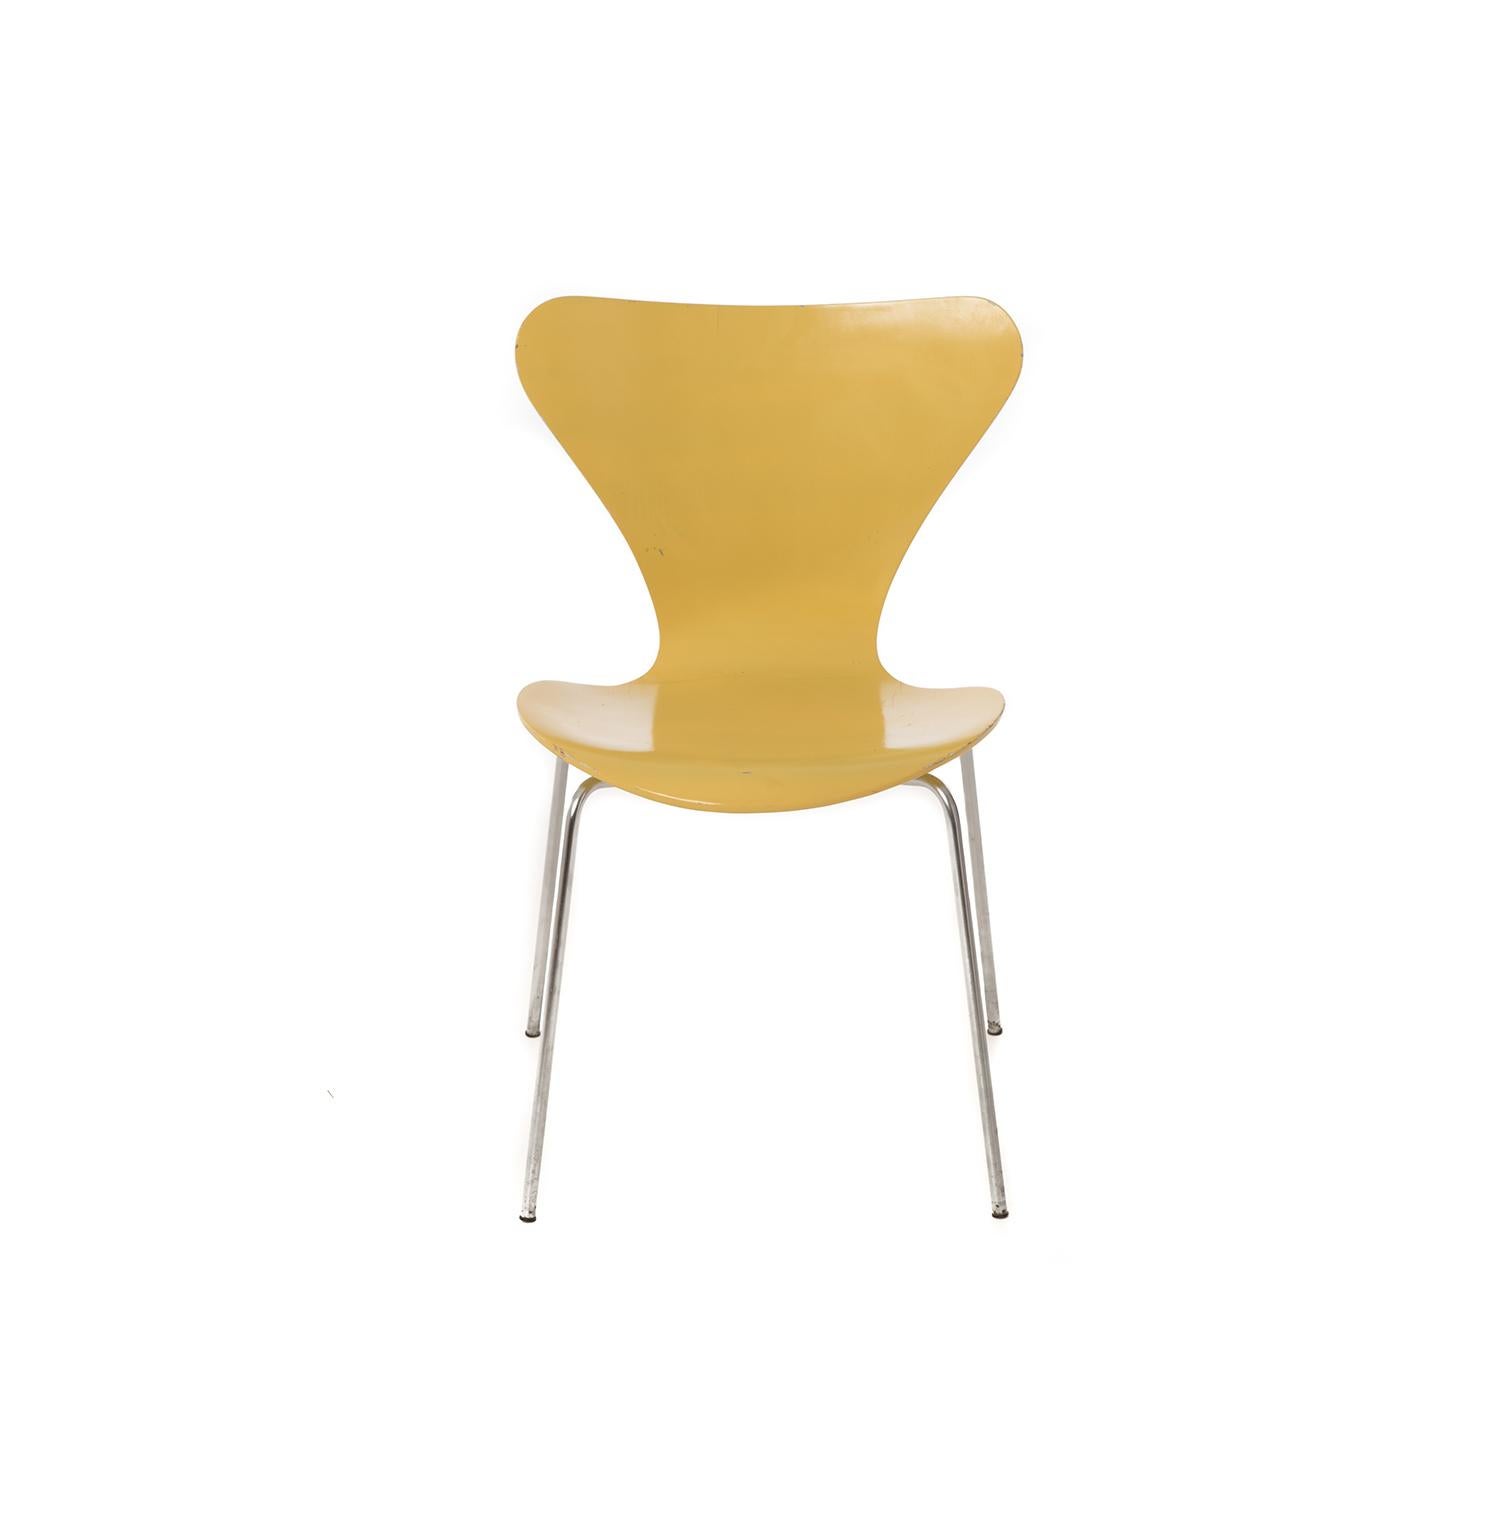 These Classic chairs are a cheery shade of yellow! This is a 4 legged chair, metal legs, designed by Arne Jacobsen in 1951. The first chair designed for the mass market-- easy to transport... across the ocean and in your home. Plus it's comfortable